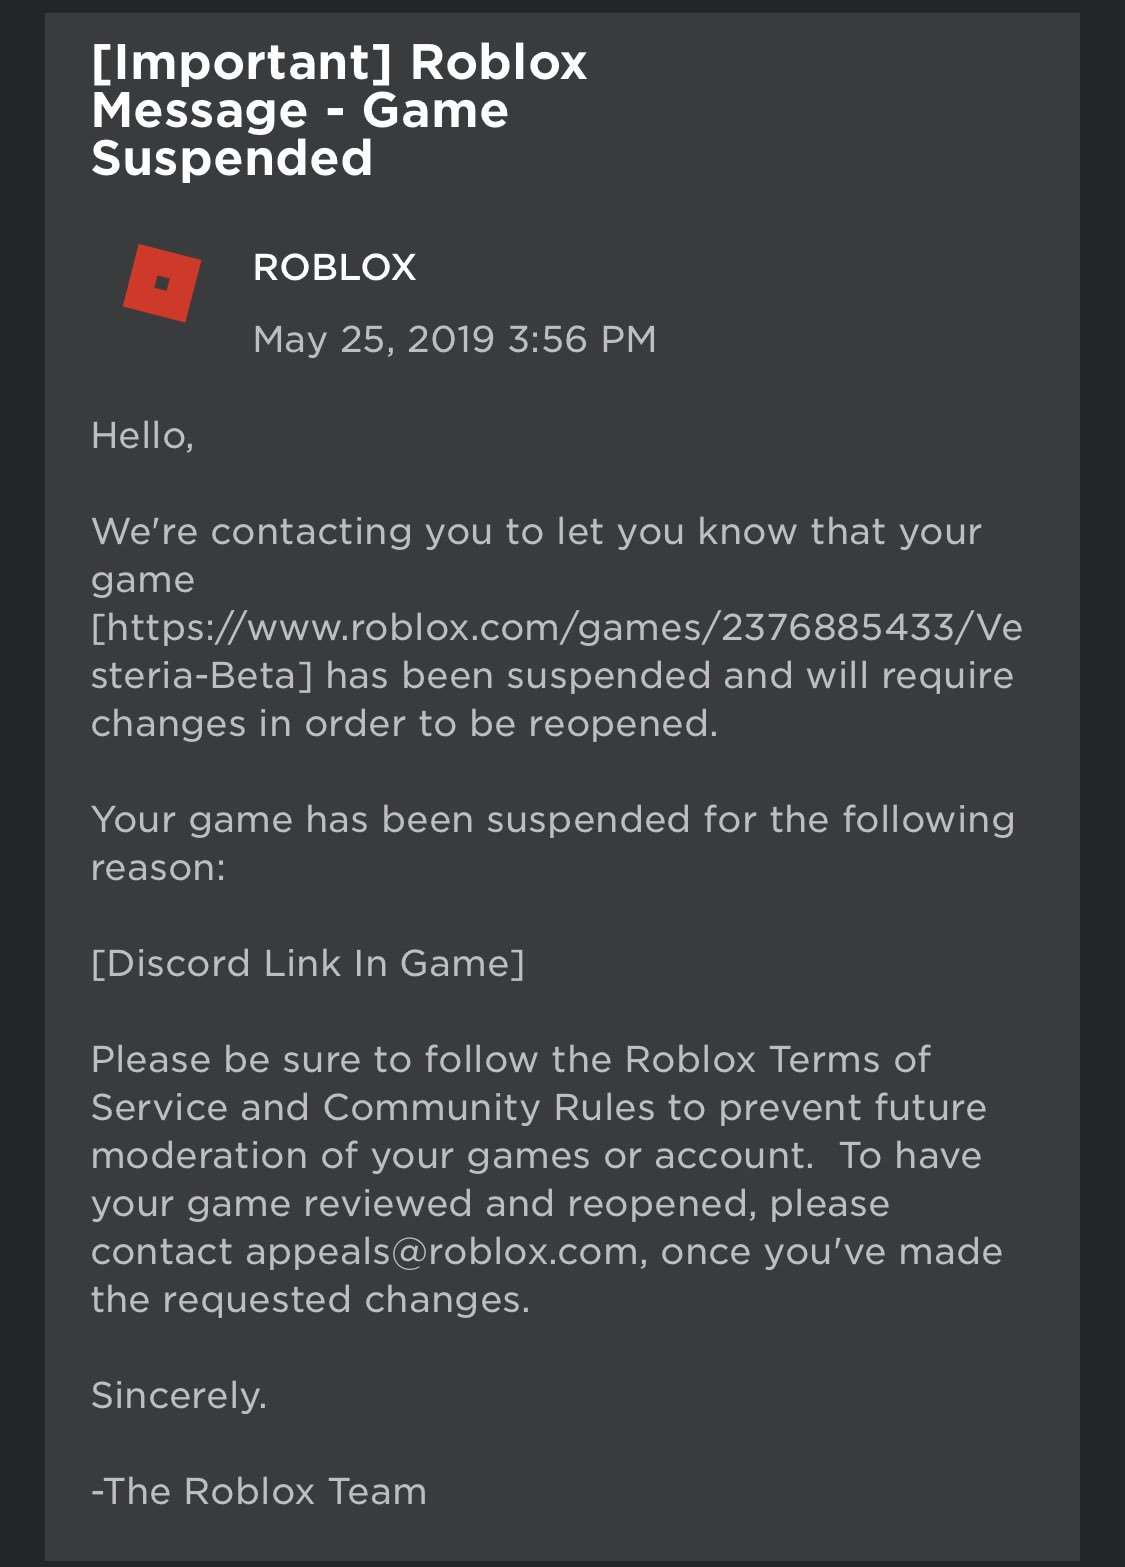 Roblox Under Review